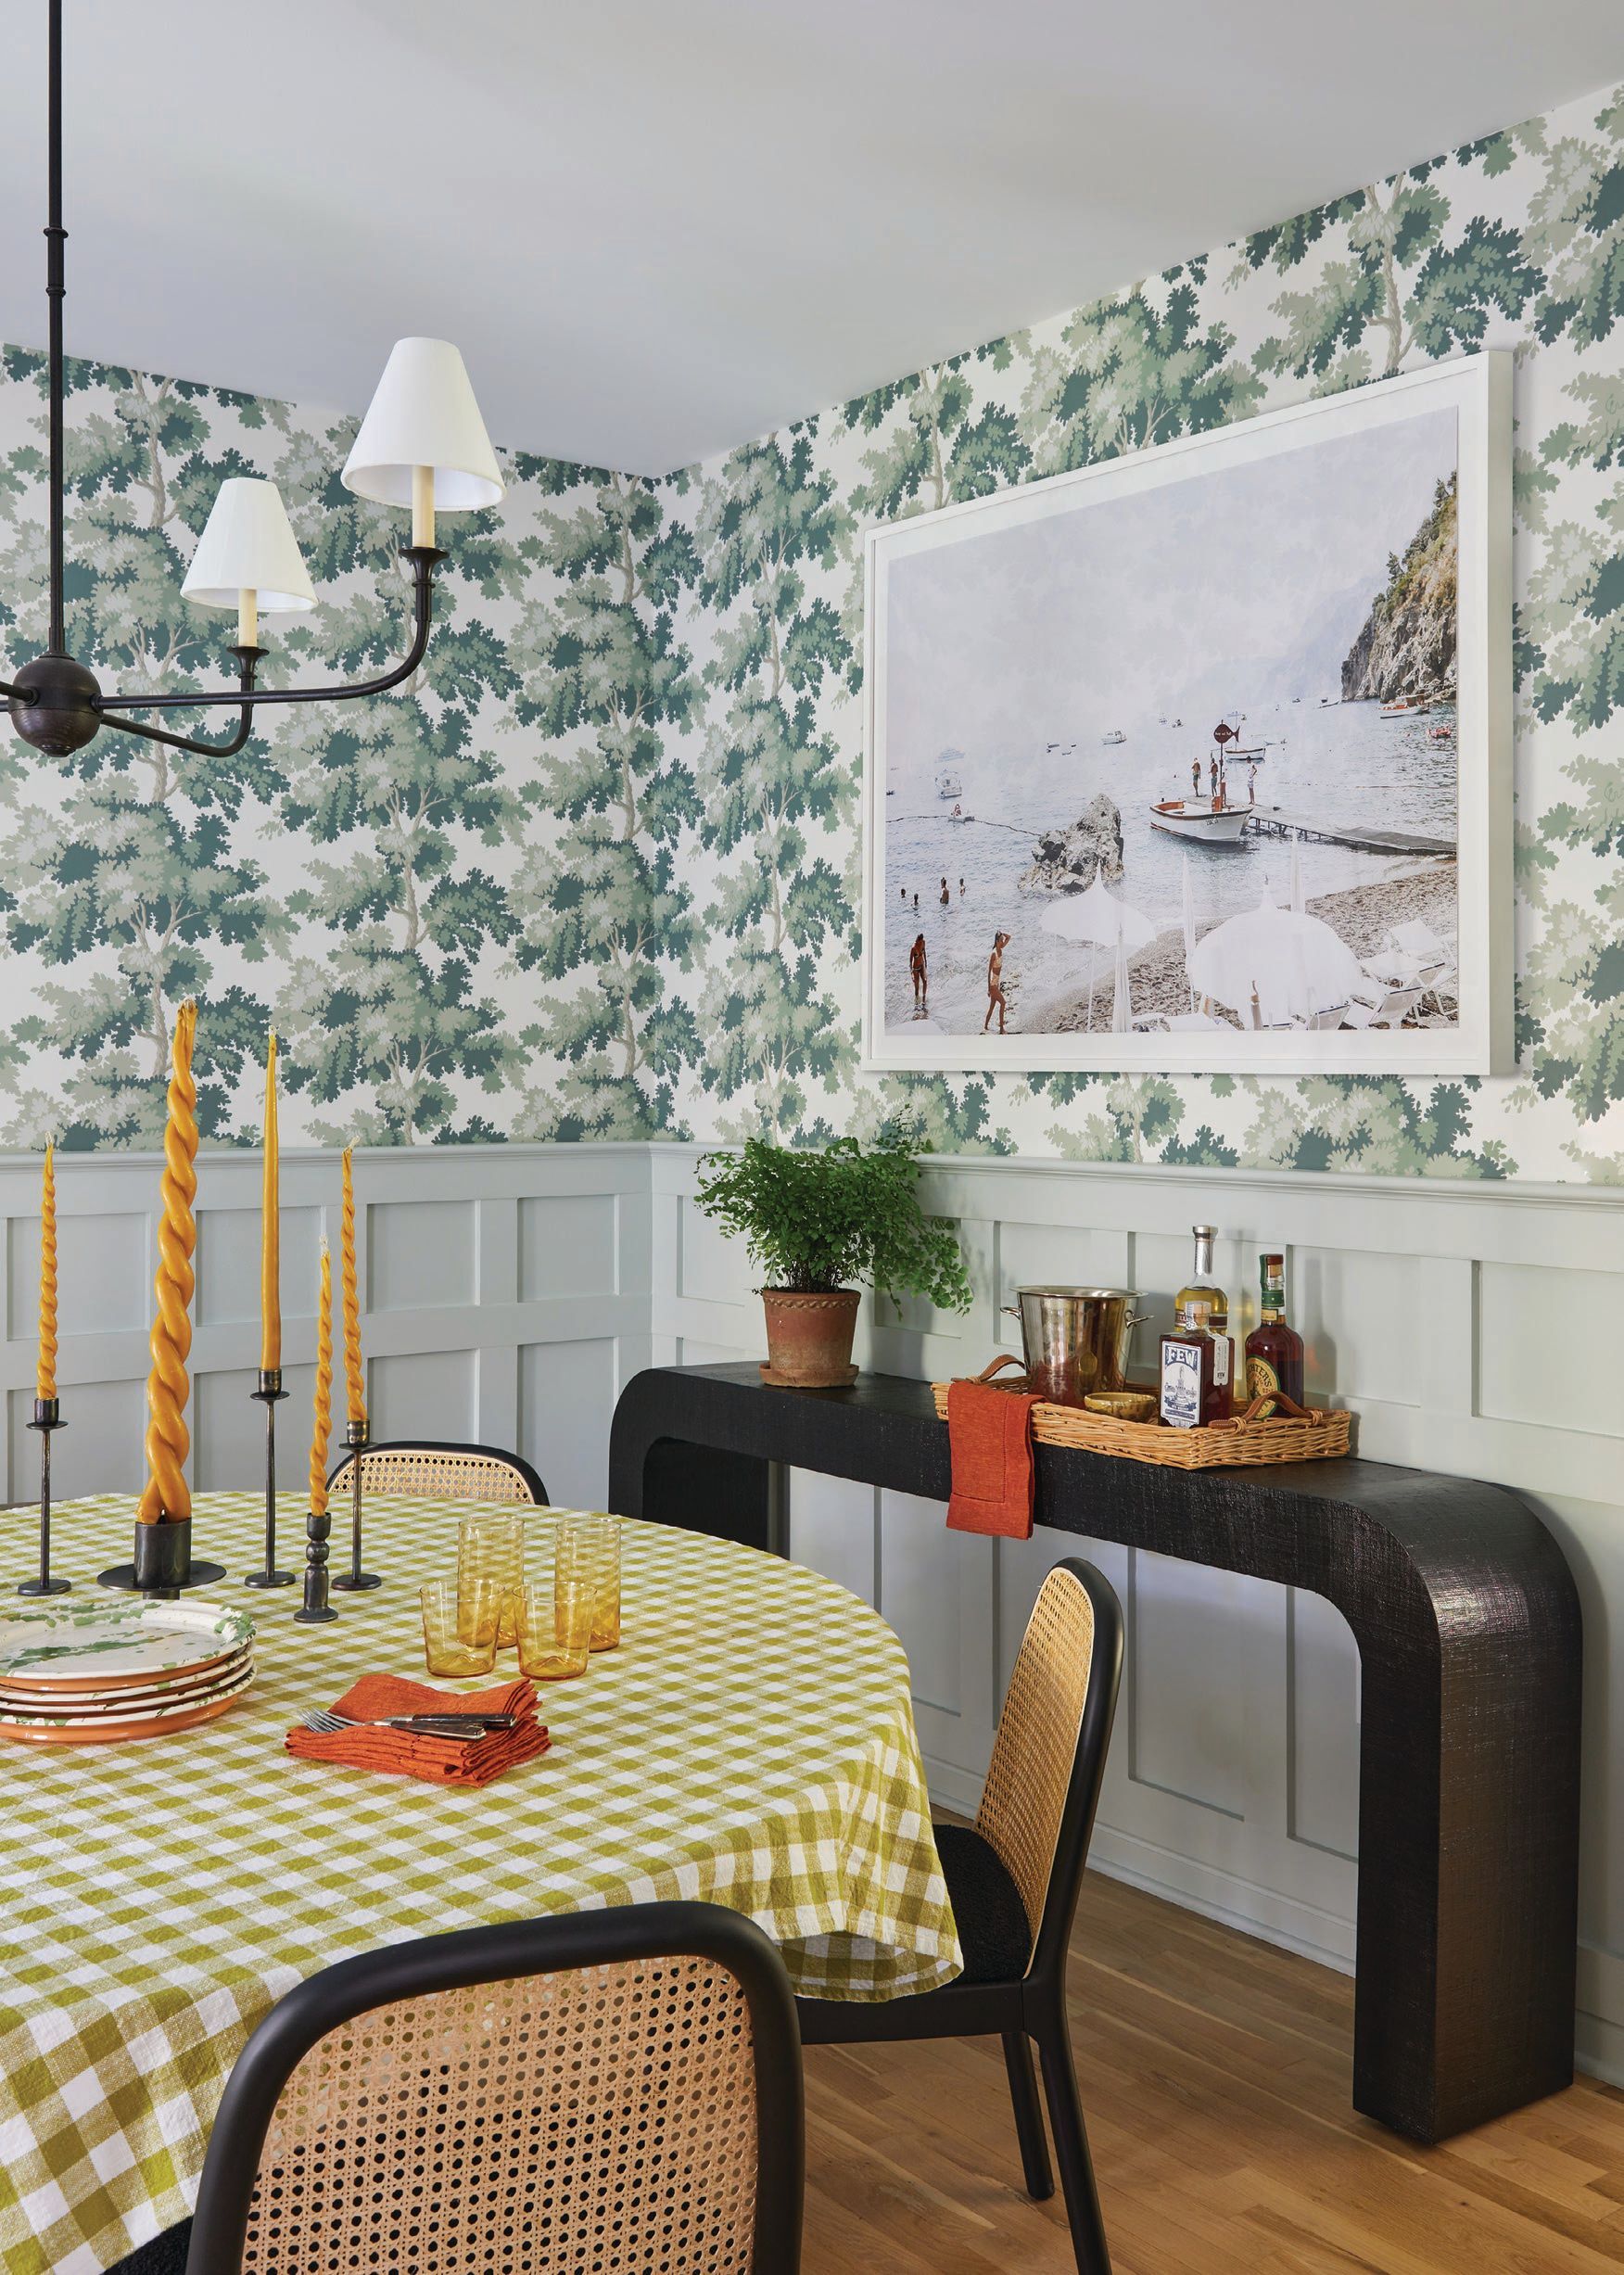 The dining room is print-positive, marrying green Scalamandré
Raphael wallpaper with a Serena & Lily tablecloth and more. PHOTOGRAPHED BY KIRSTEN FRANCIS